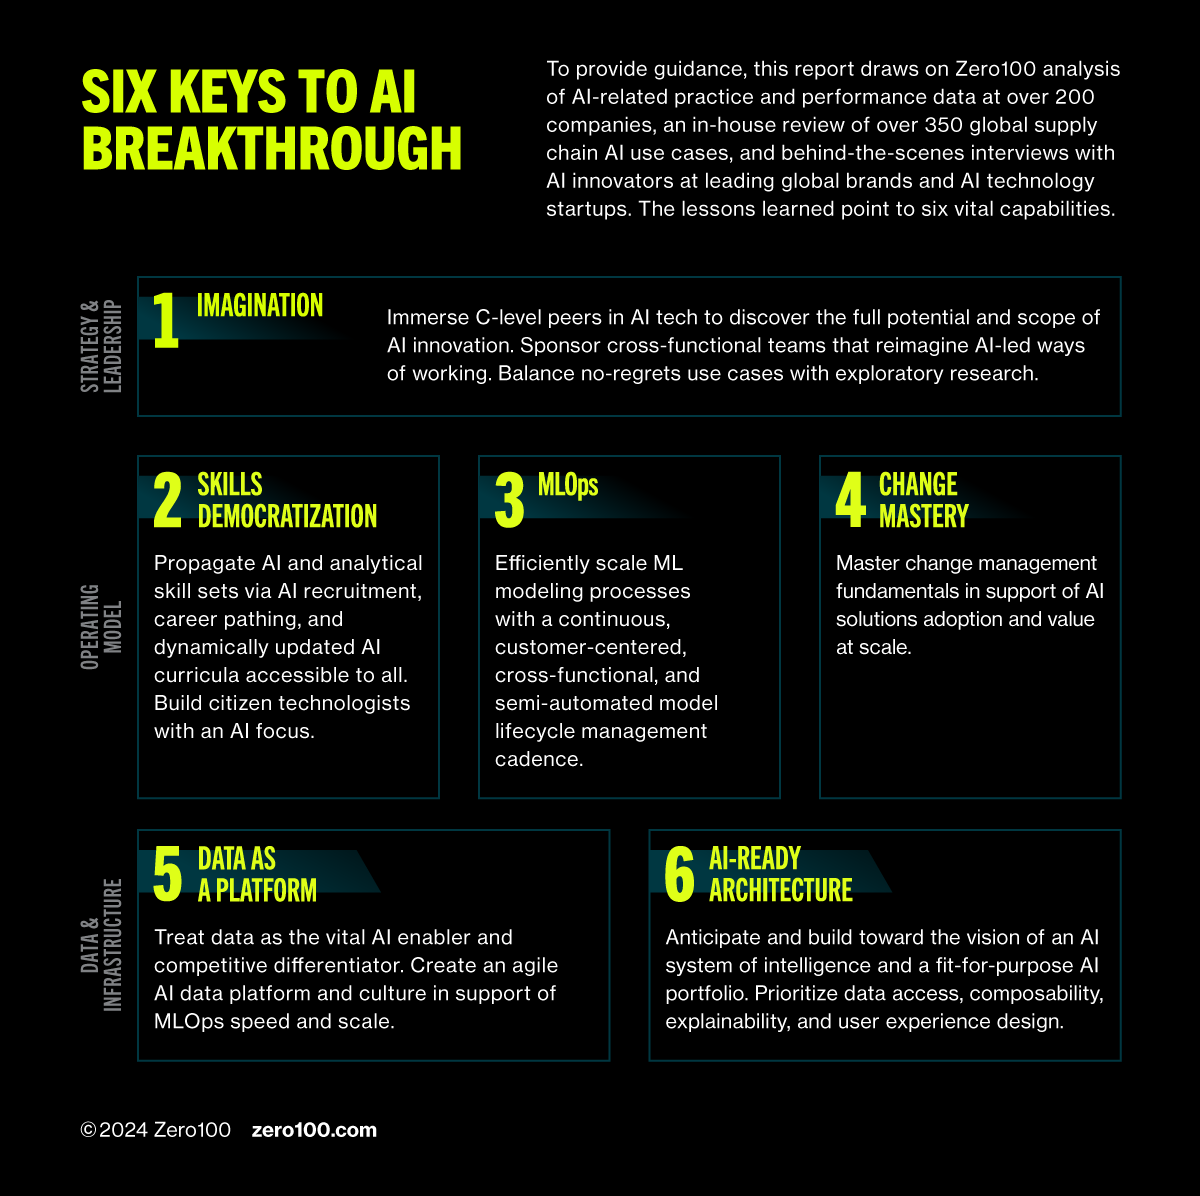 Image depicting the Six Keys to AI Breakthrough.